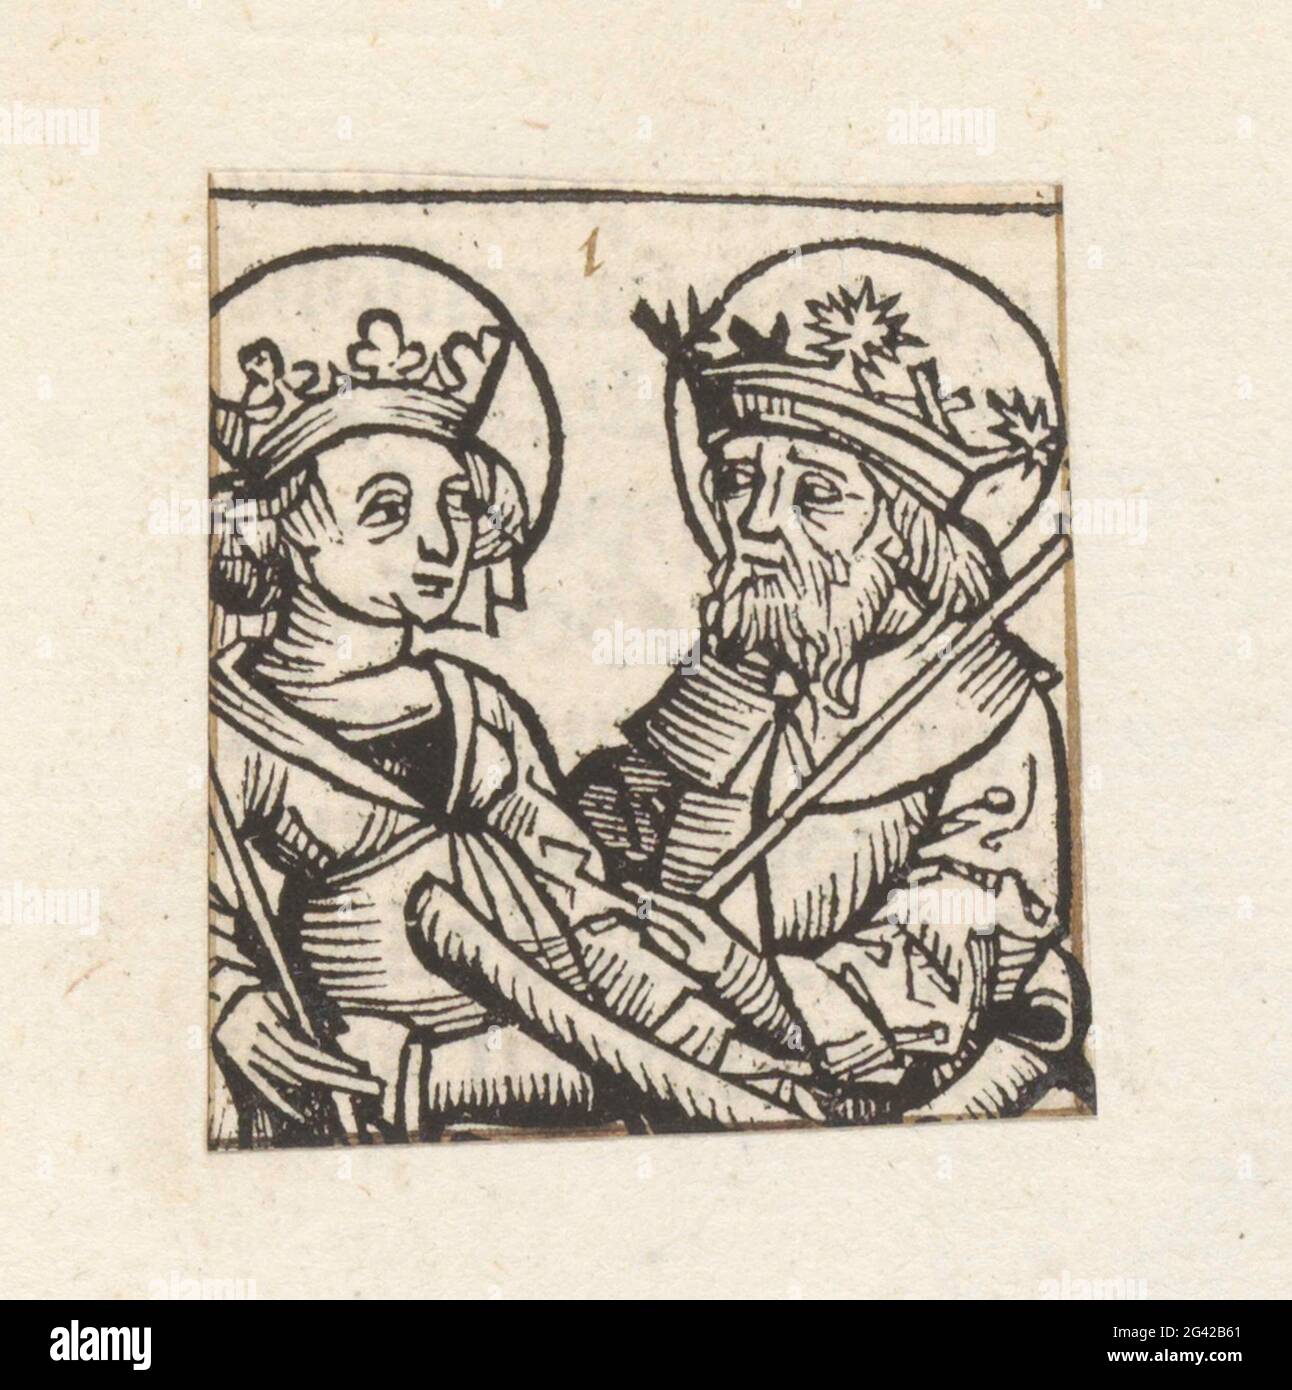 Gisela van Bavaria and Stefanus I of Hungary; Liber chronicarum. A king and queen. The show is part of the family tree of Keizer Hendrik II the Saint in the Liber Chronicarum. The text identifies the couple as Gisela of Bavaria and Stefanus I of Hungary. The print is part of an album. Stock Photo